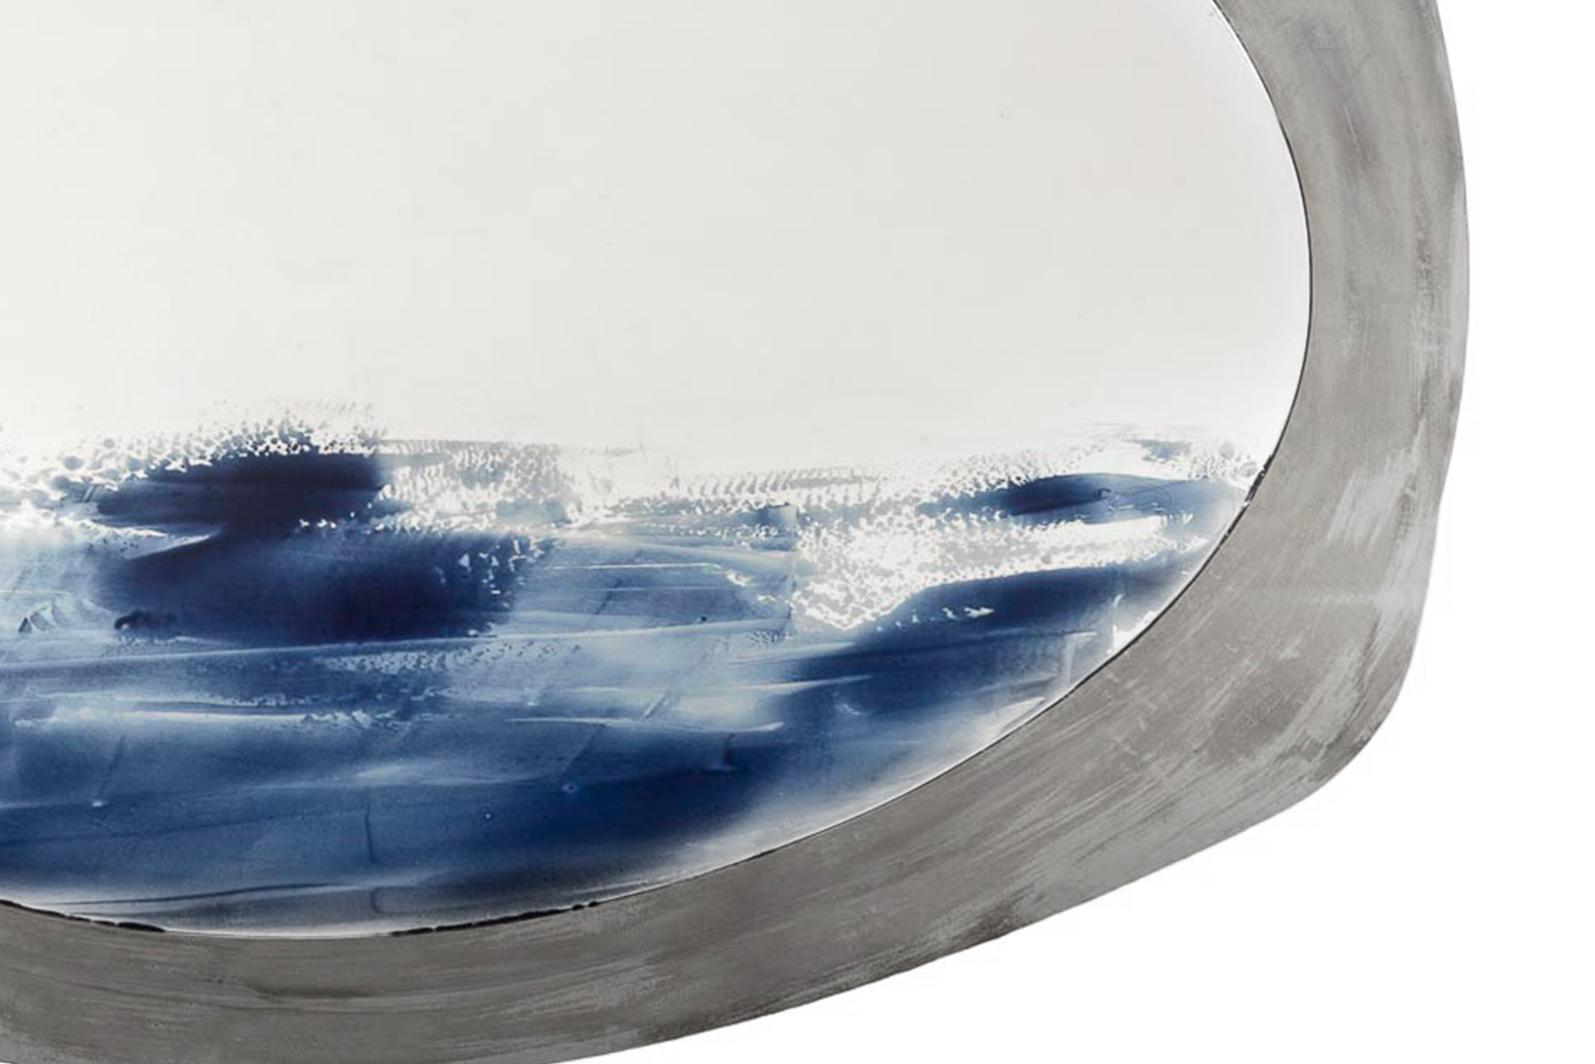 This mirror composition is the result of two-dimensional shapes
arranged in two different layers. front sheet: ultra white low iron 5 mm float glass, edge polished, hand painted with hand brushed blue ceramic enamels melted on the surface during the